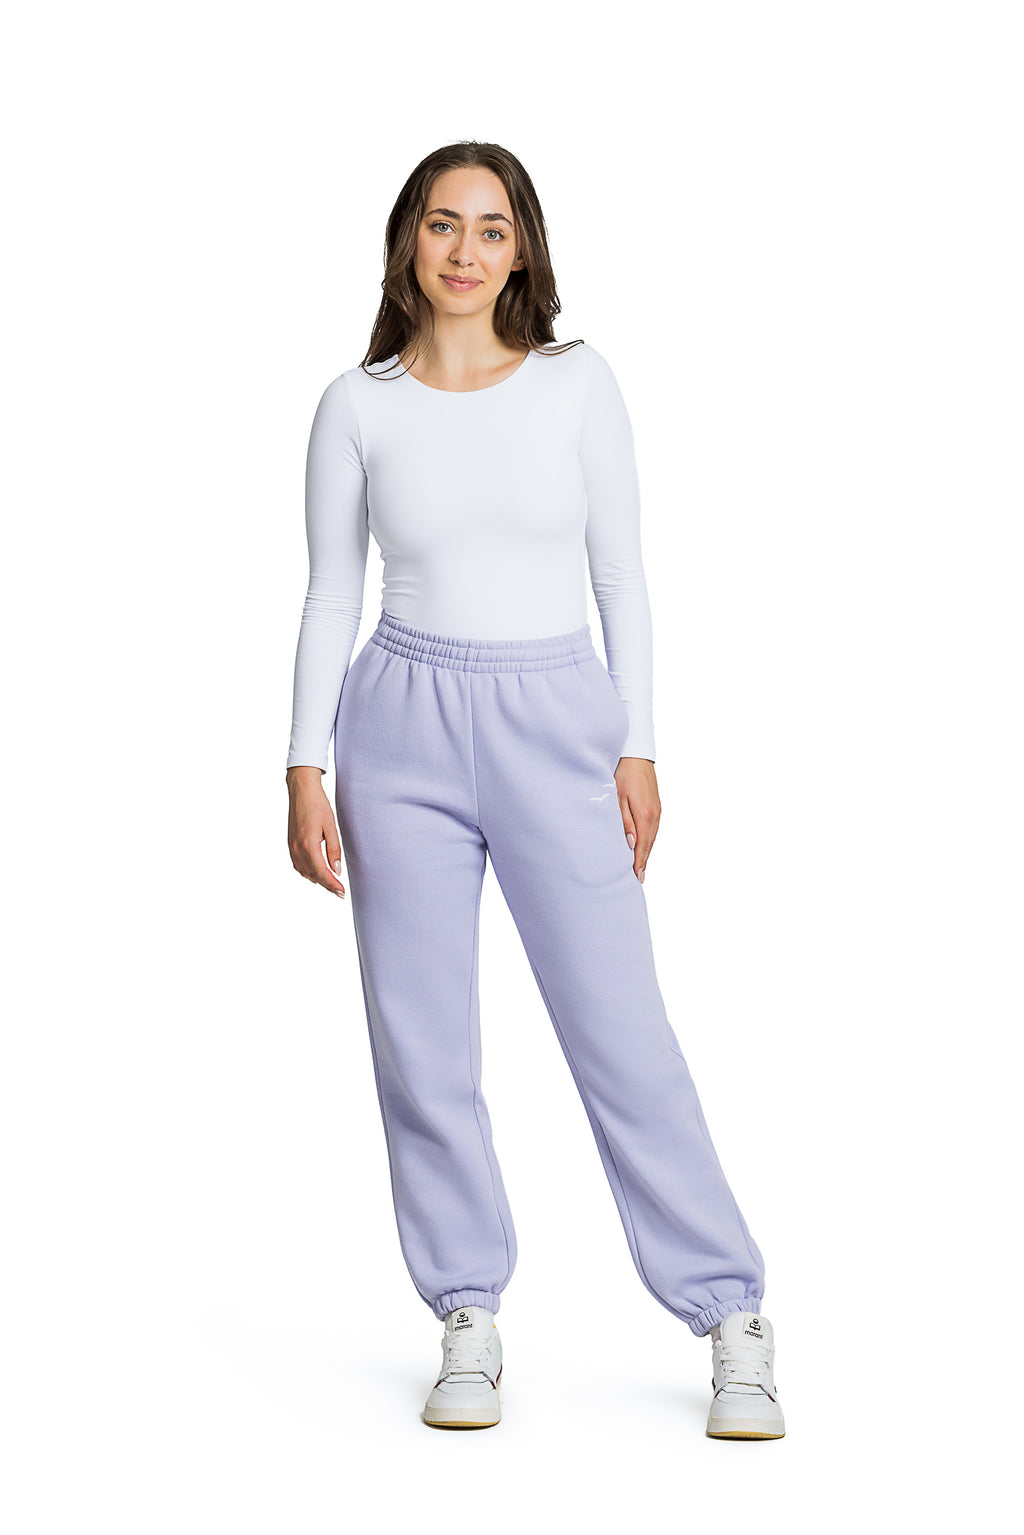 Simmi Clothing Simmi exclusive kick flare jogger in lavender - ShopStyle  Activewear Trousers